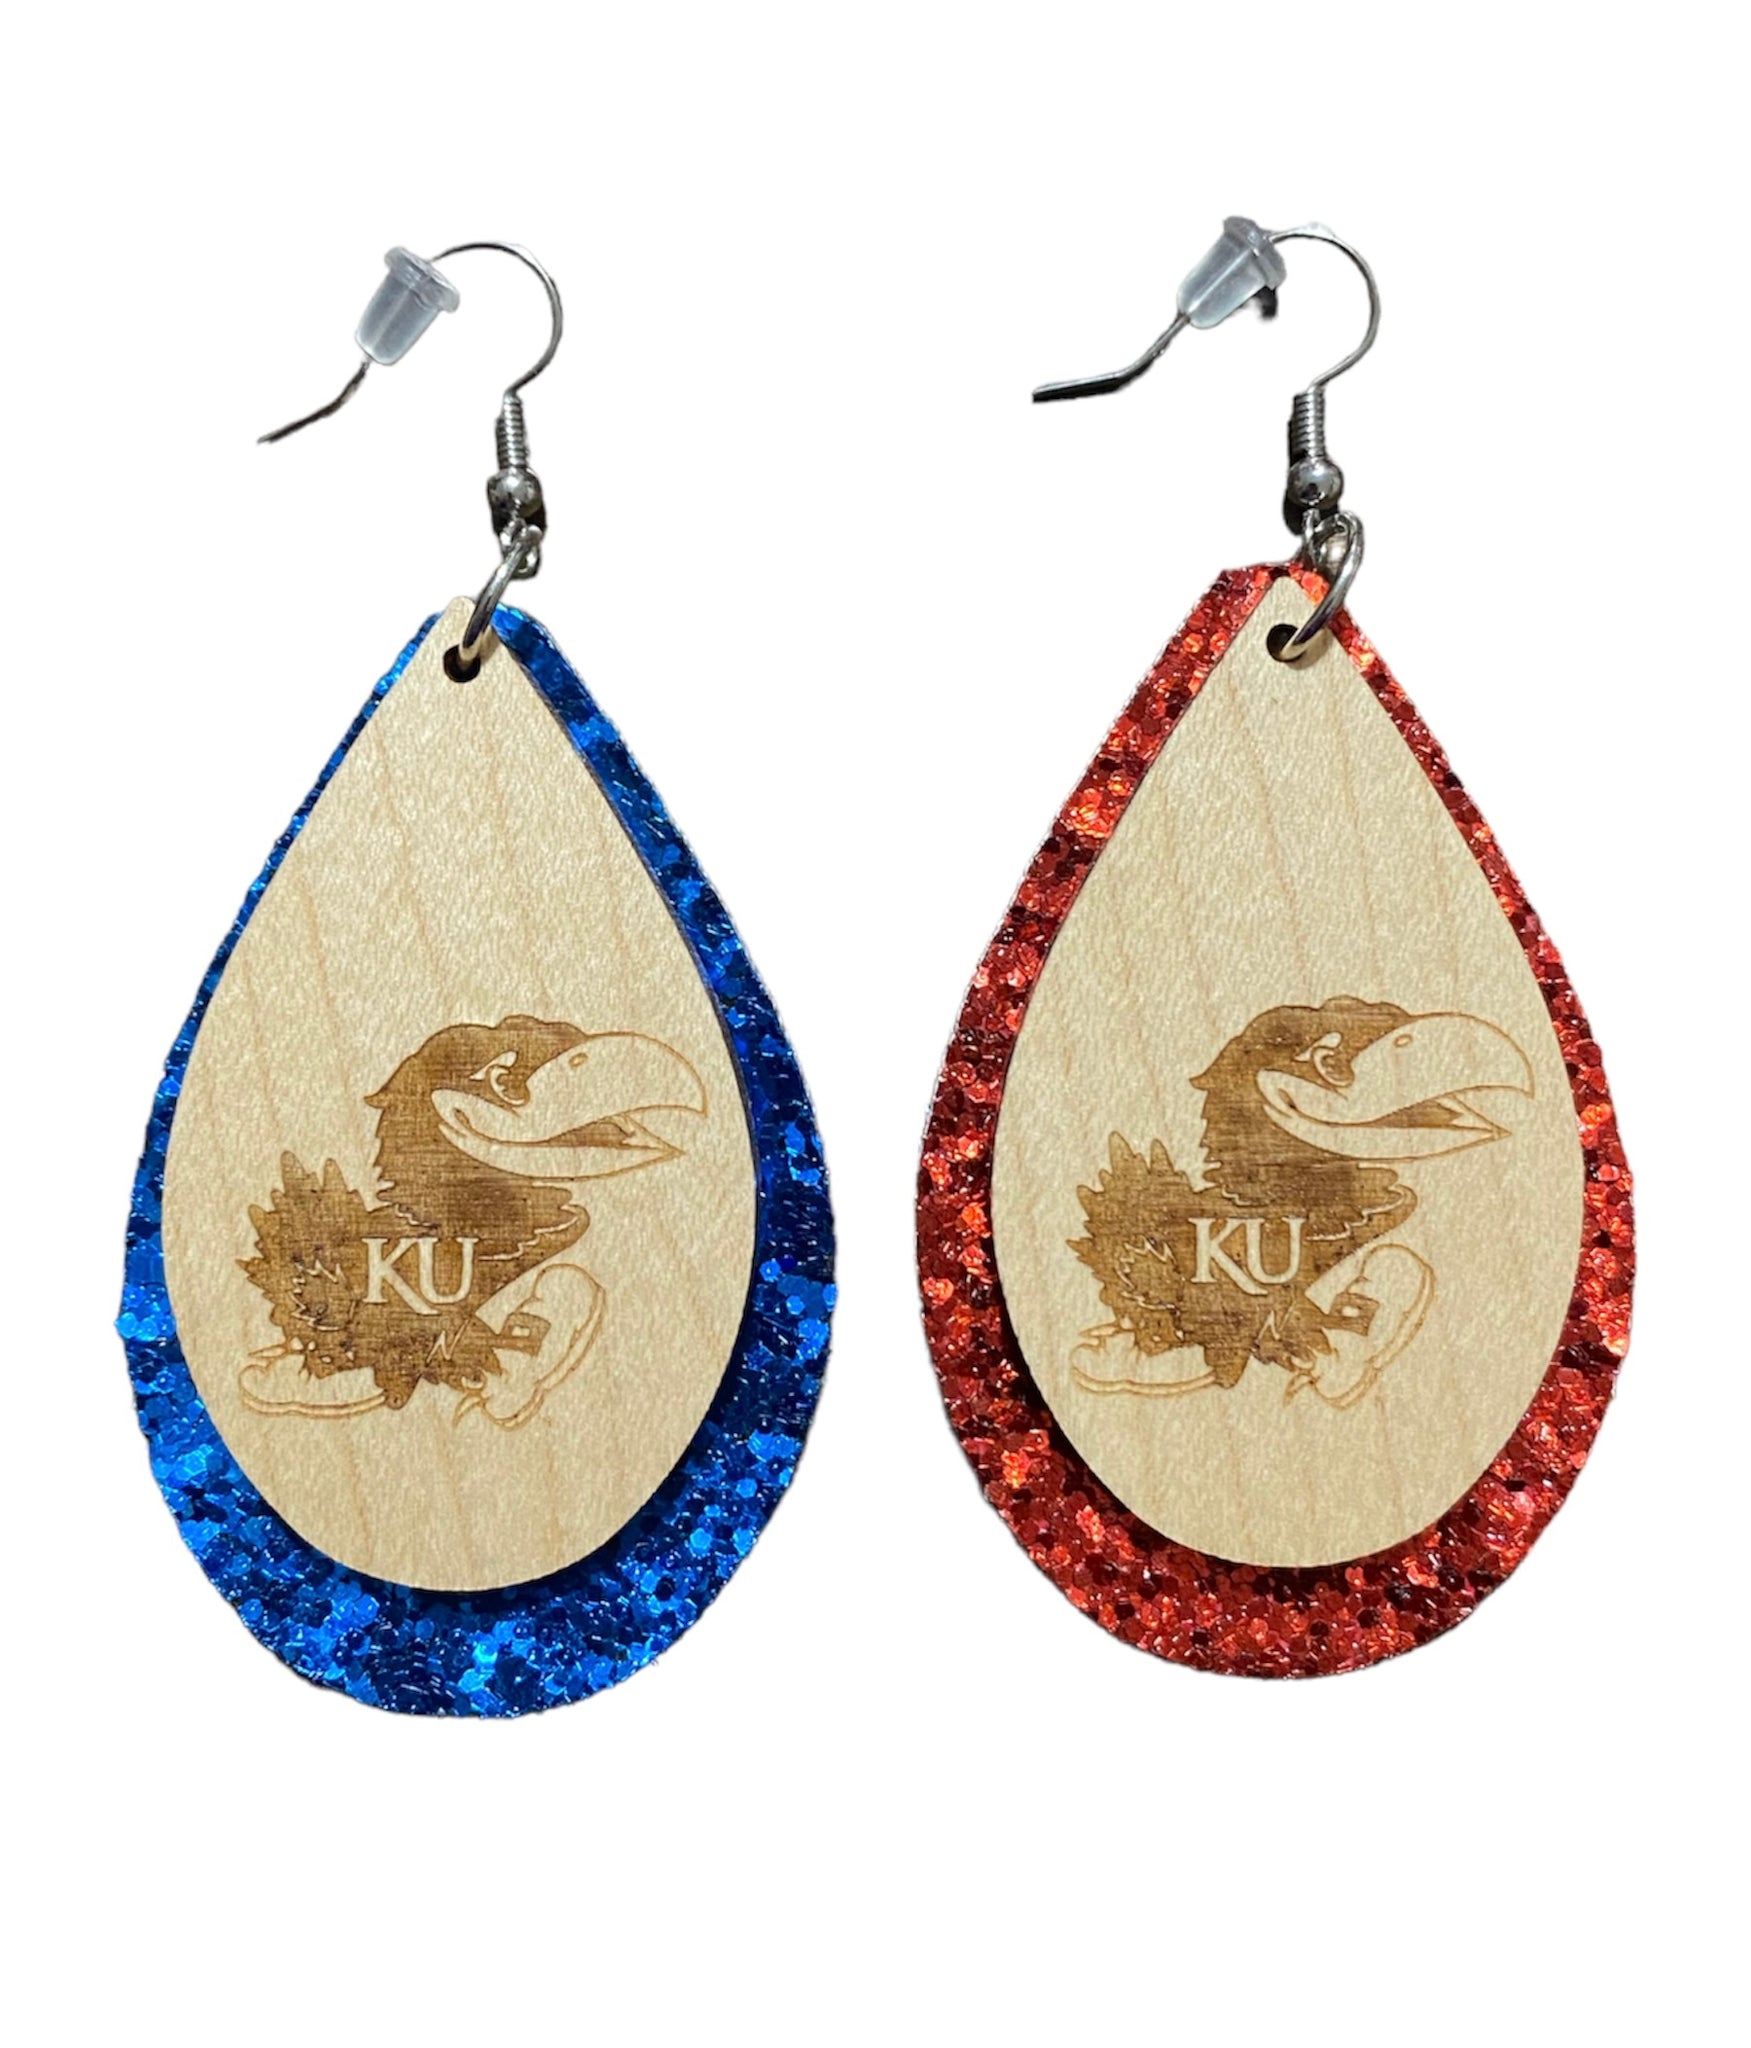 Layered Jayhawks Engraved Earrings with Faux Leather